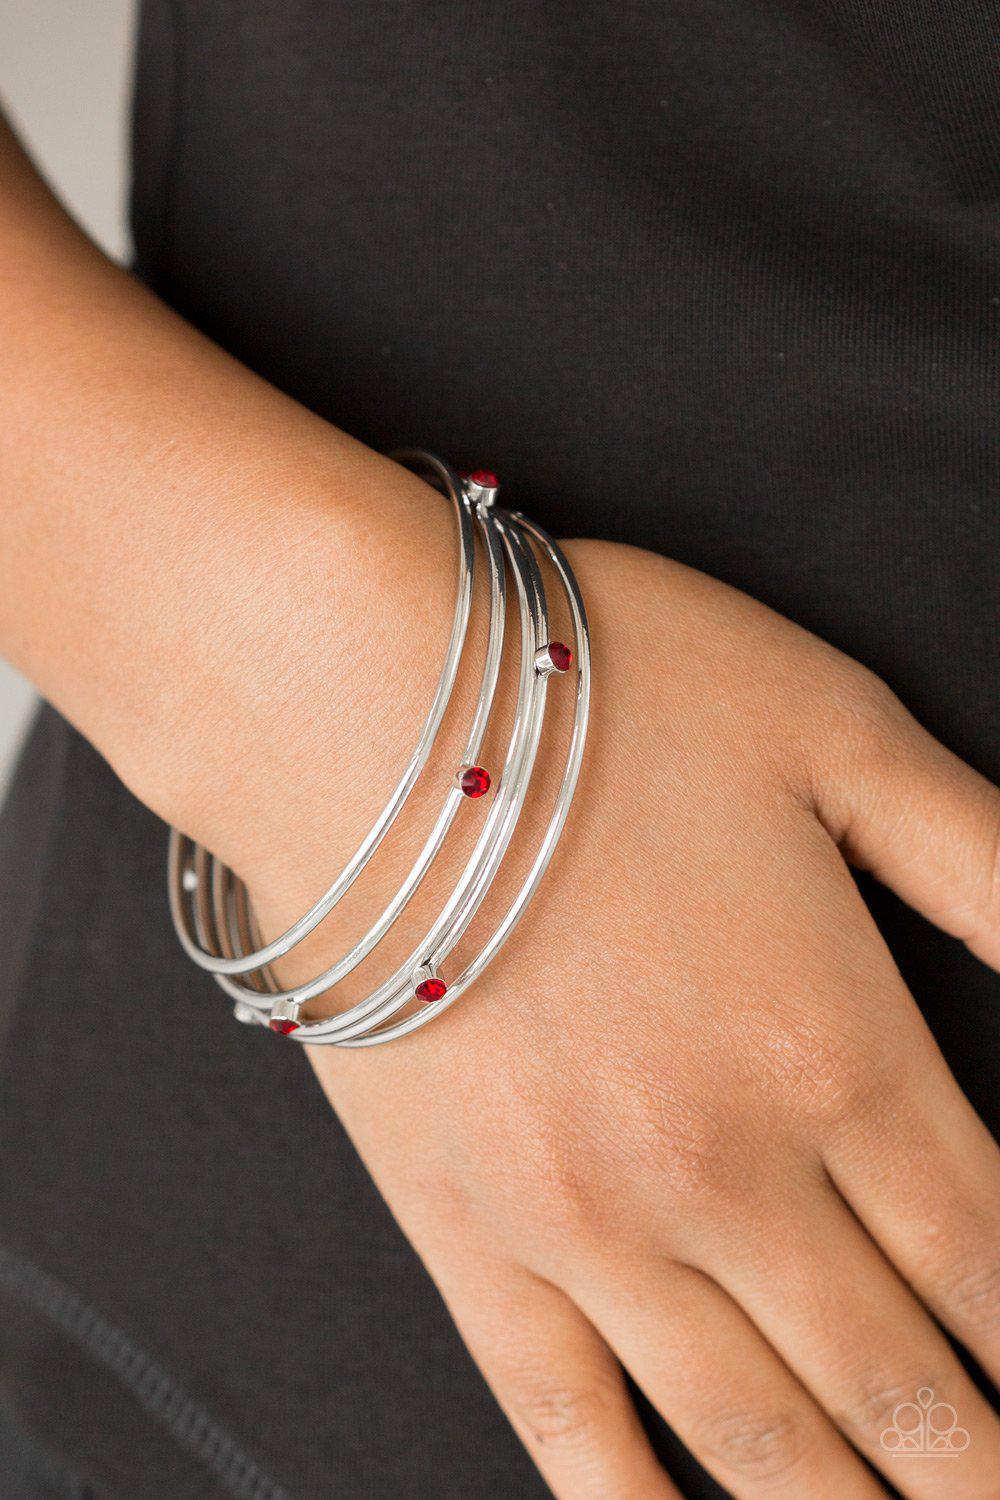 Delicate Decadence Red Rhinestone and Silver Bangle Bracelet Set - Paparazzi Accessories-CarasShop.com - $5 Jewelry by Cara Jewels